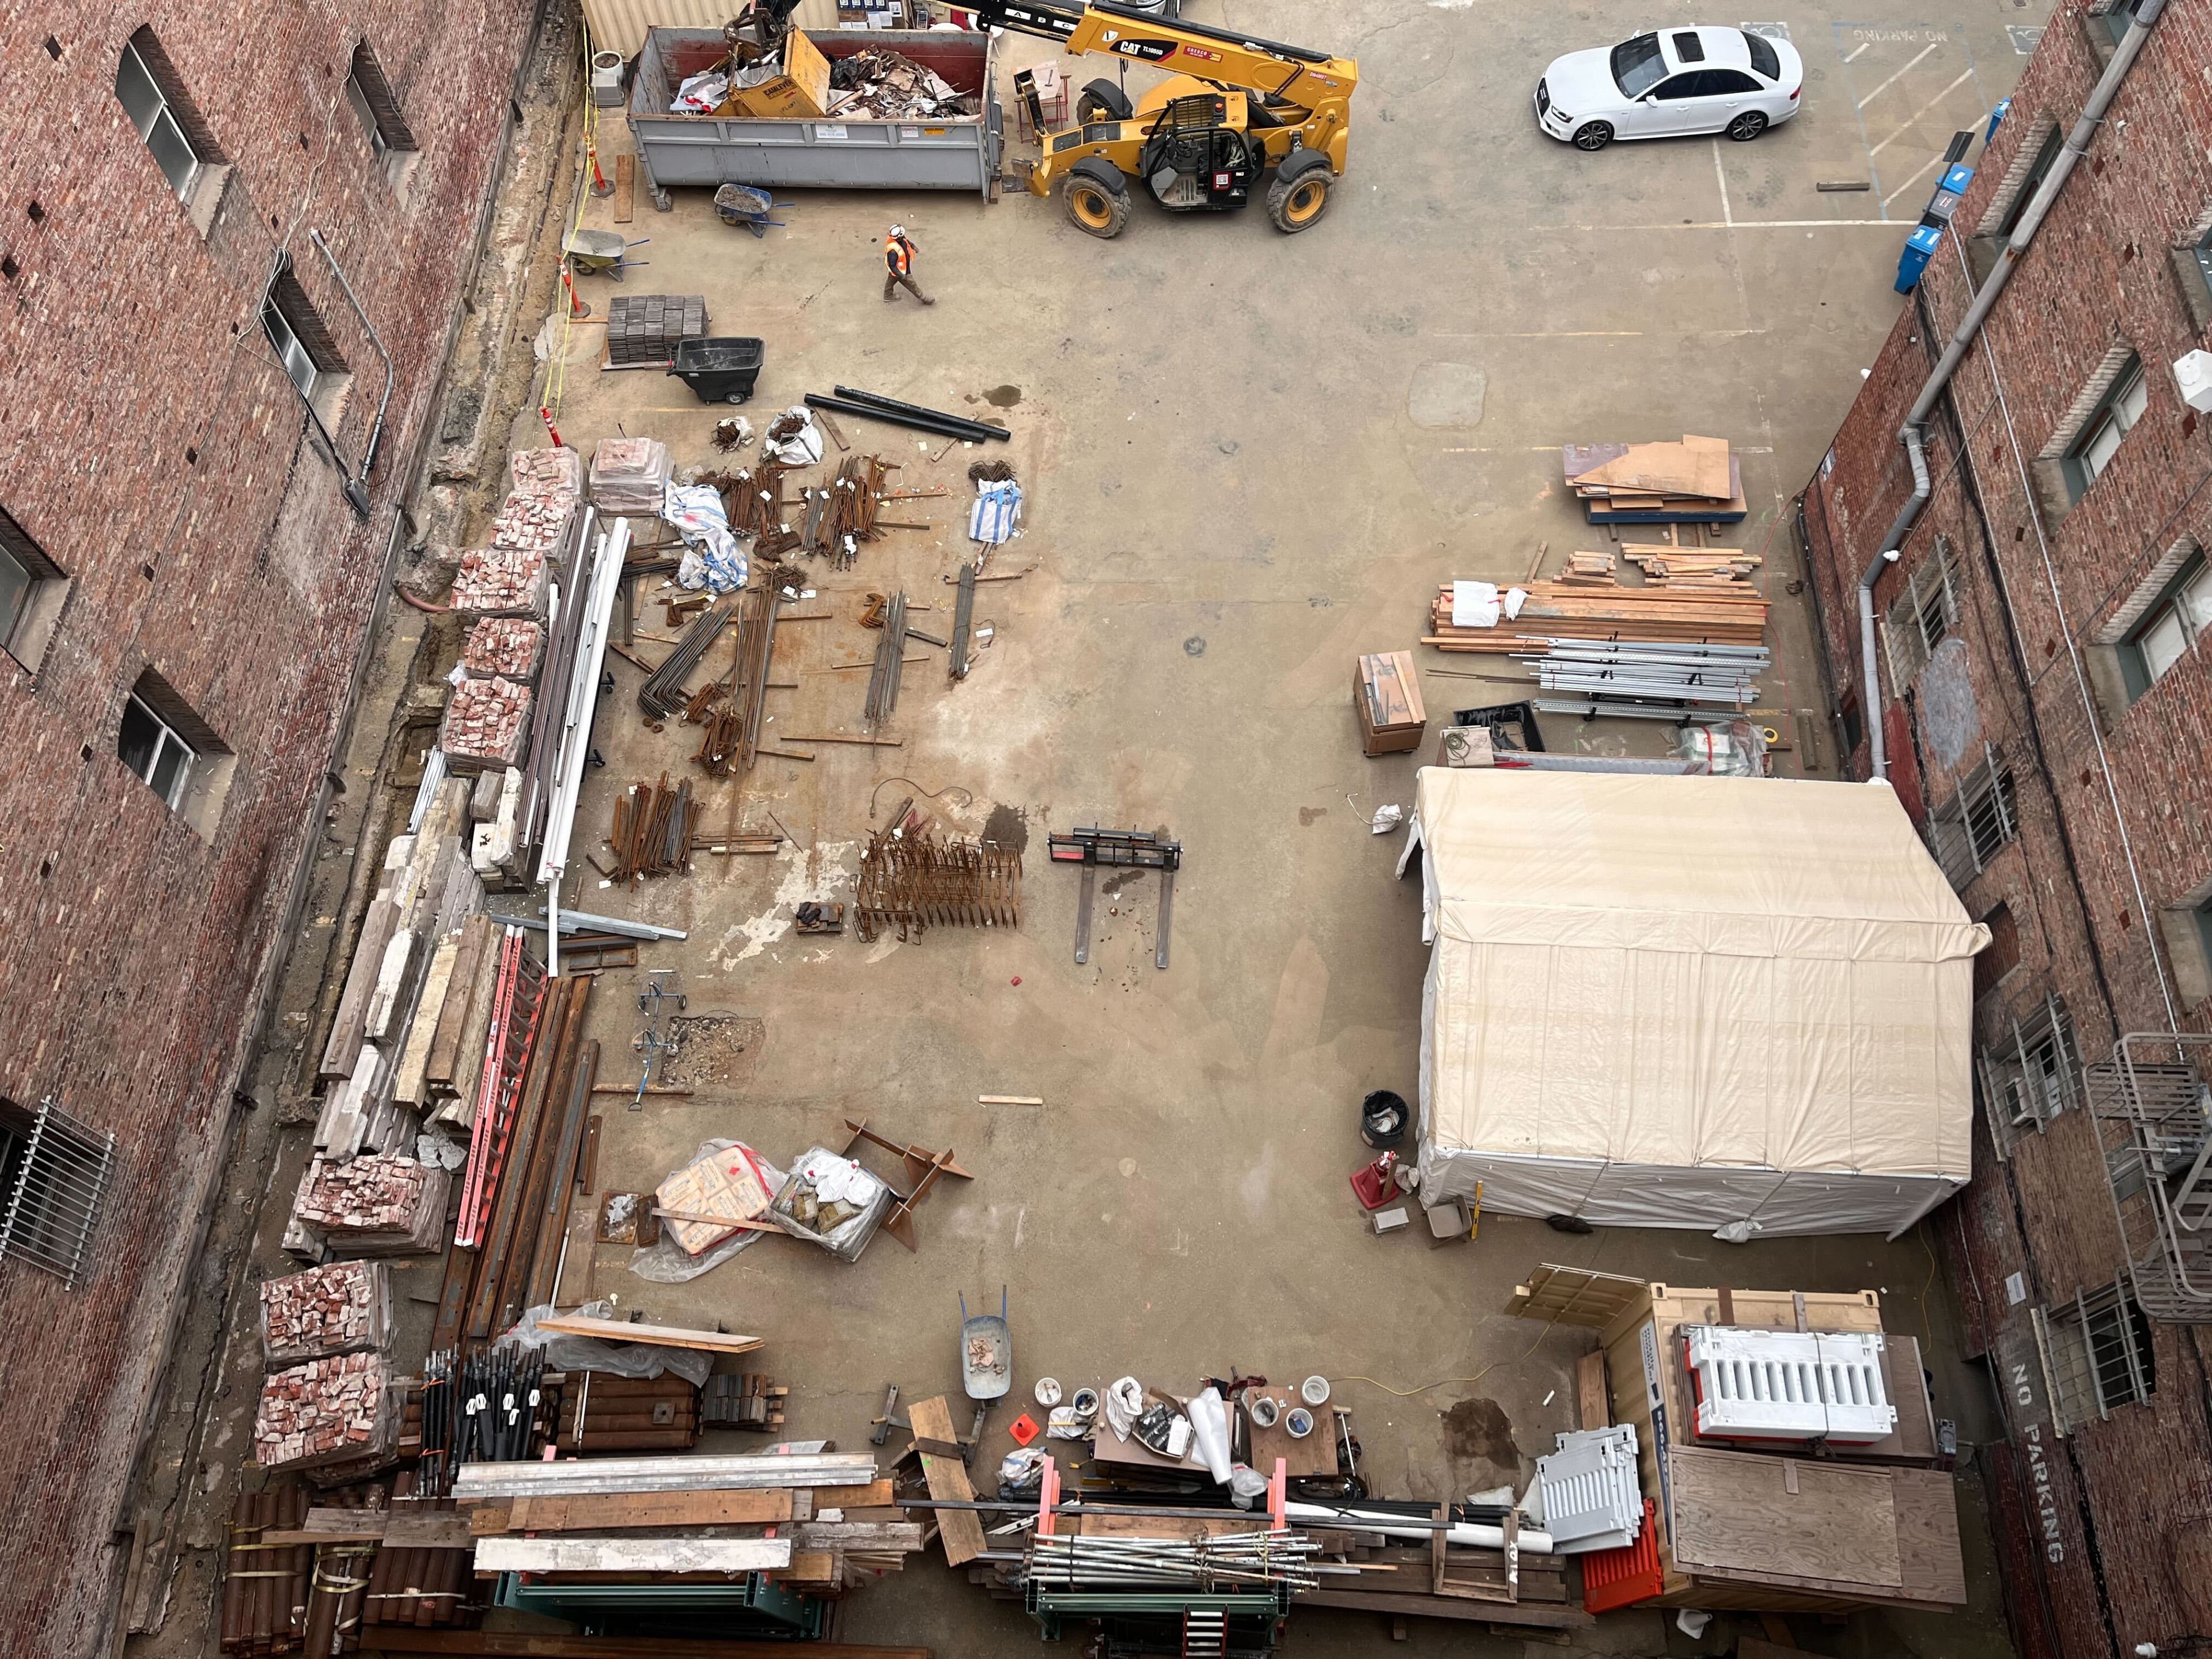 An aerial view of a construction site with materials, machinery, and a parked car, flanked by brick buildings.